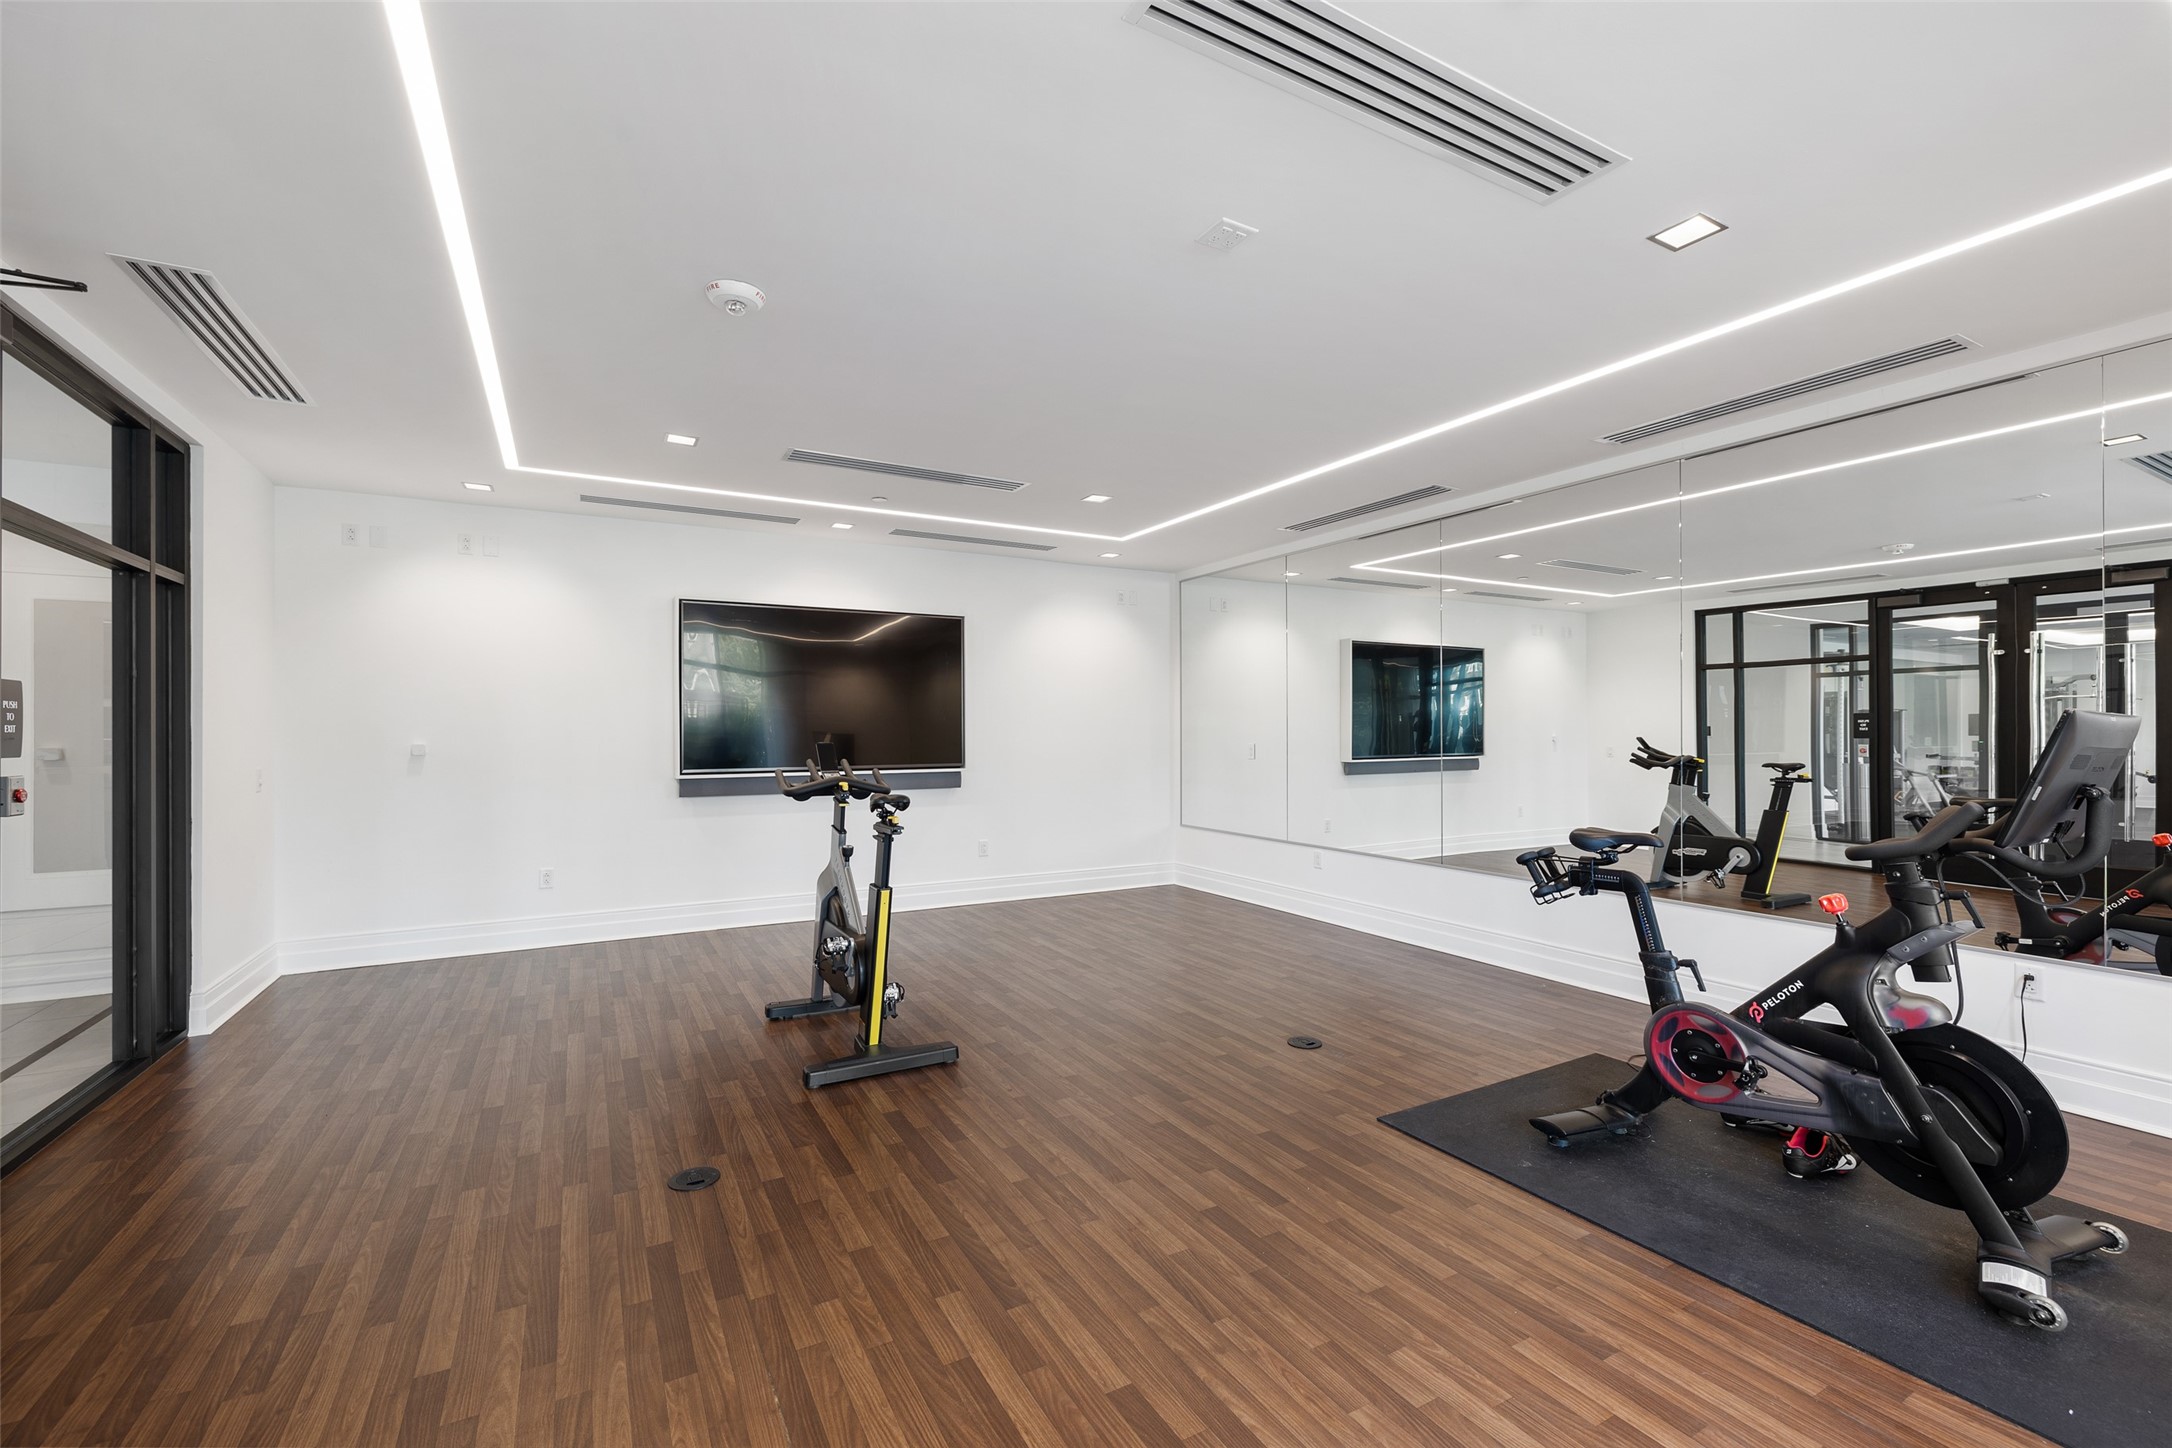 This Studio can be used for cycling, yoga or private training.